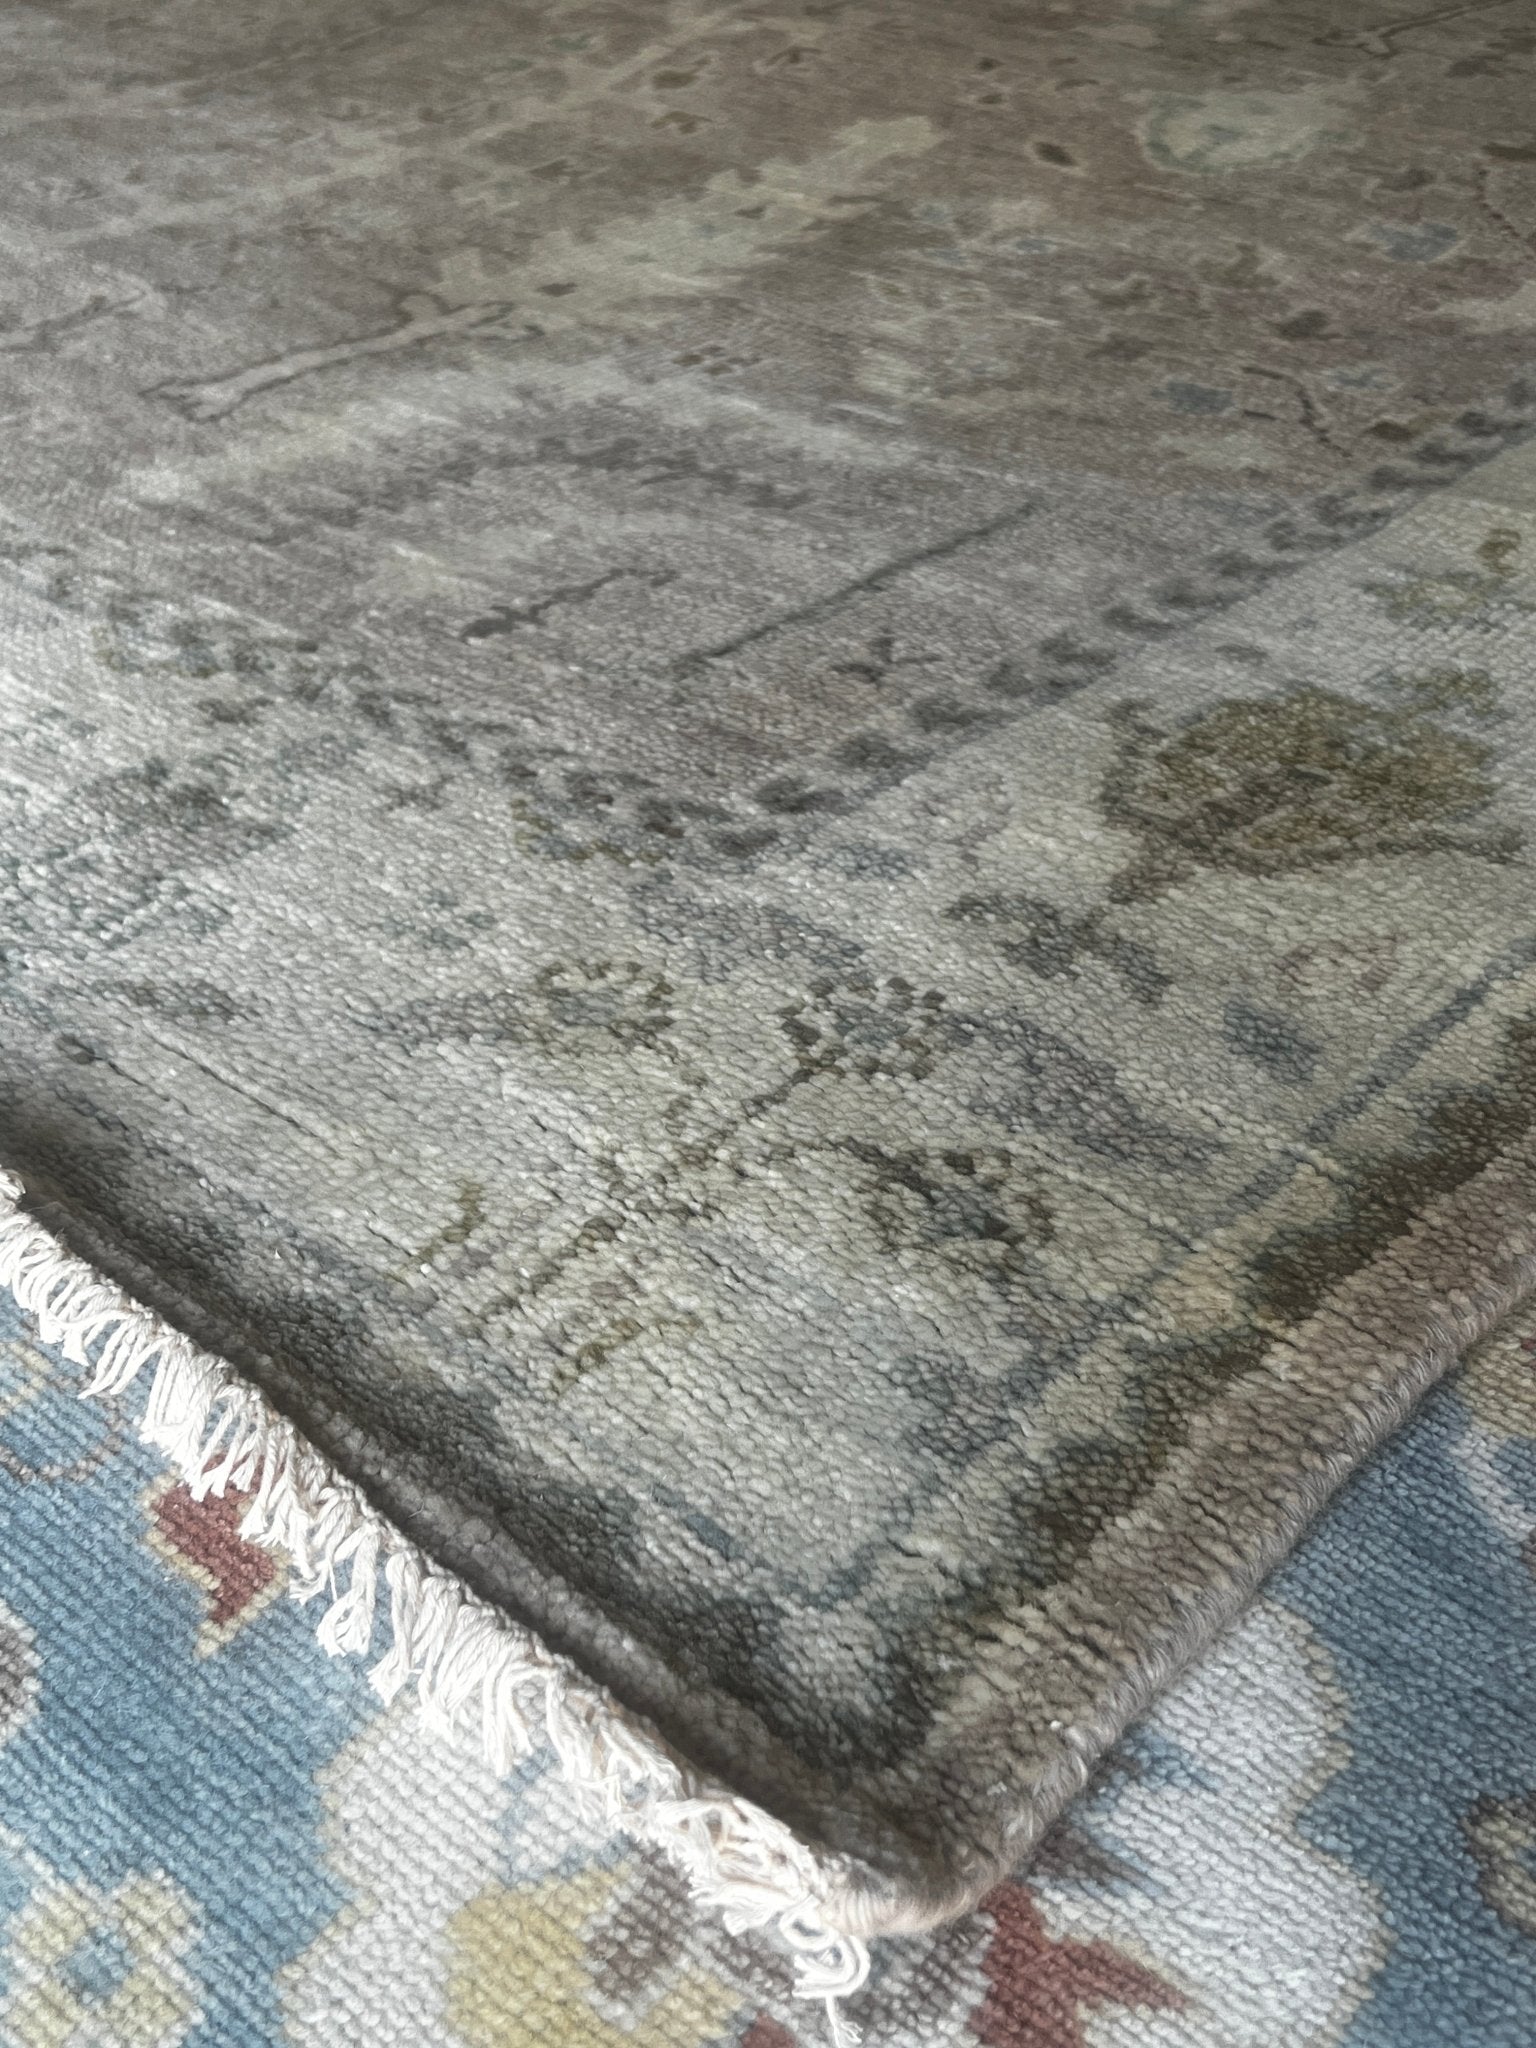 Amrita Acharia 8x10 Light Brown and Light Green Hand-Knotted Oushak Rug | Banana Manor Rug Factory Outlet